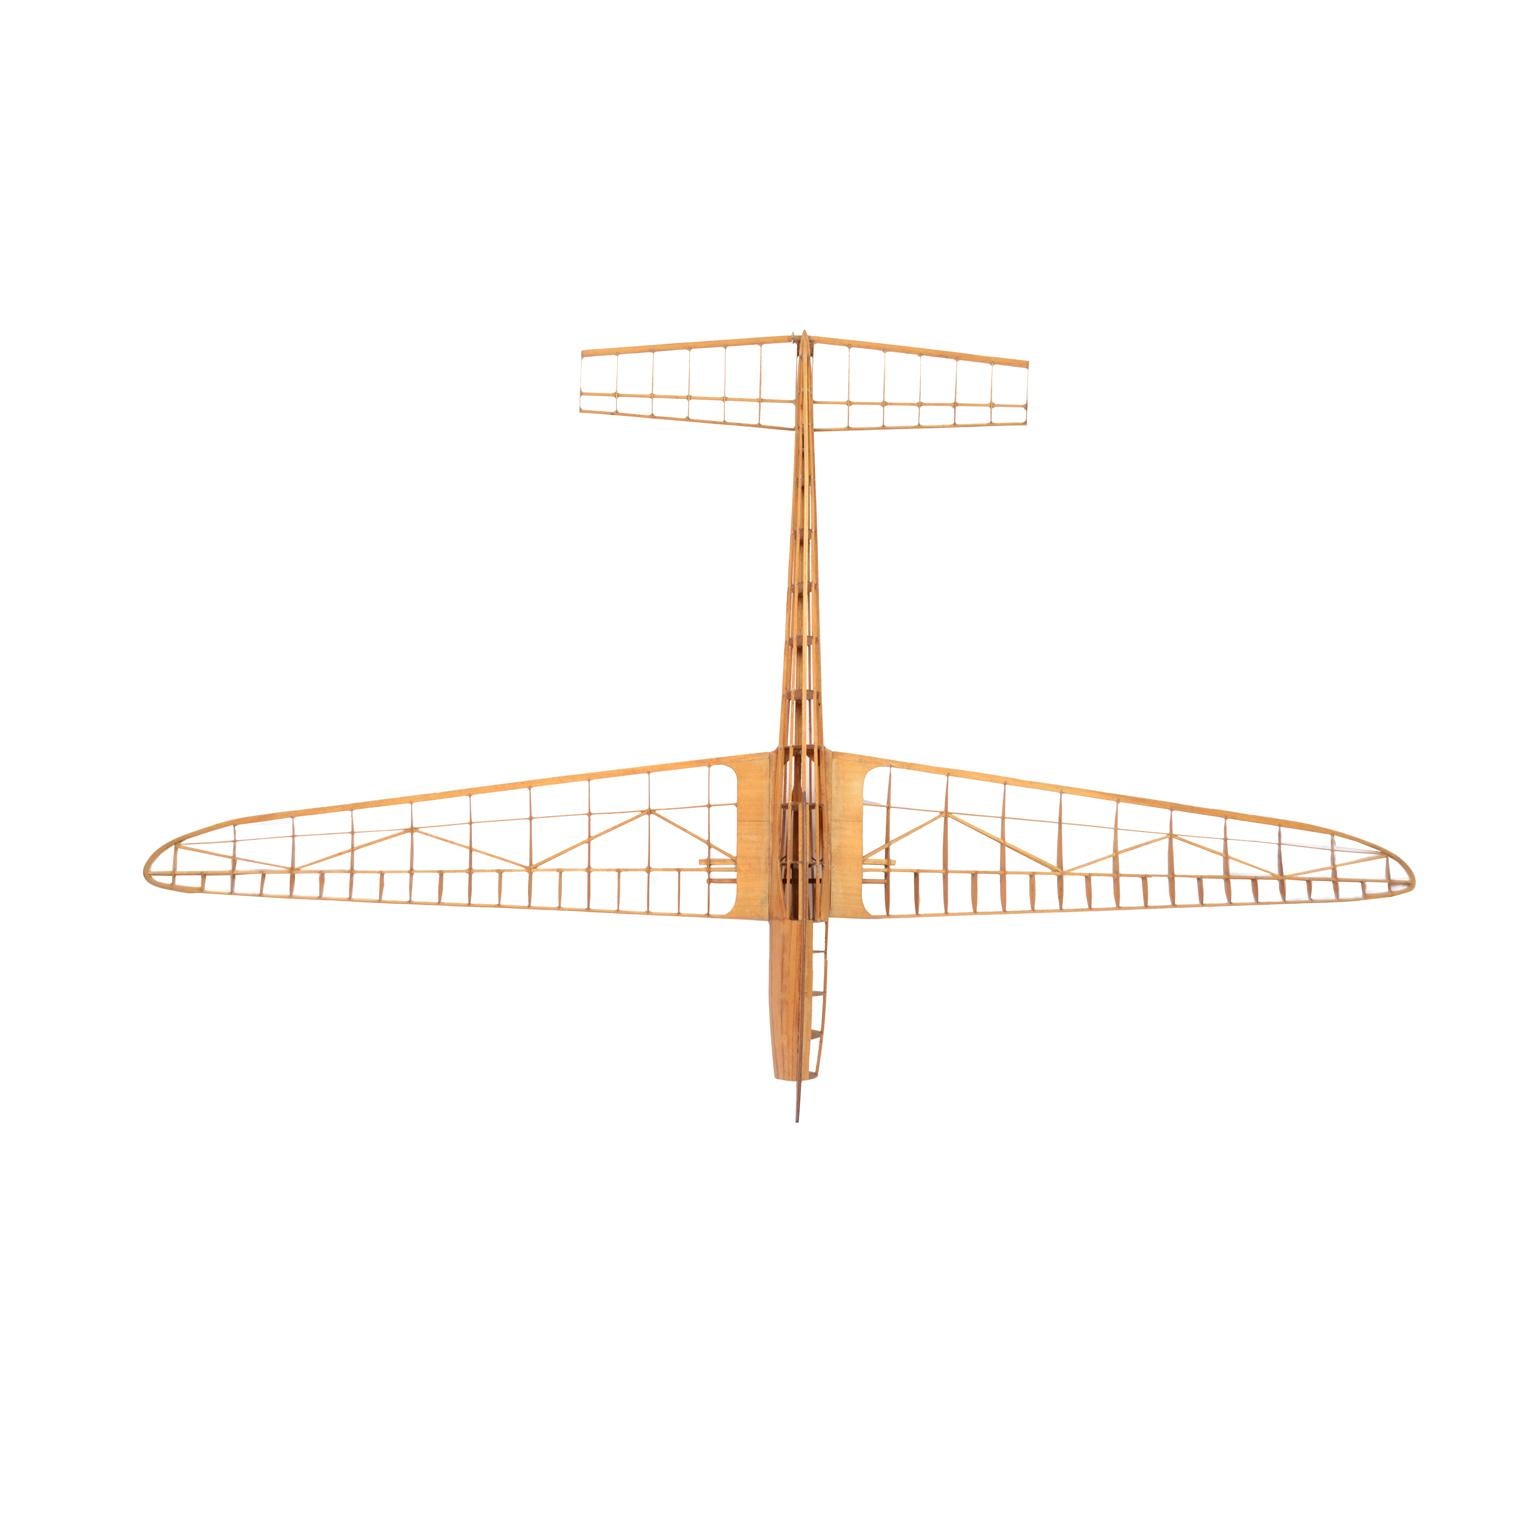 Mid-20th Century Scale Model of the Structure of a Passenger Airplane